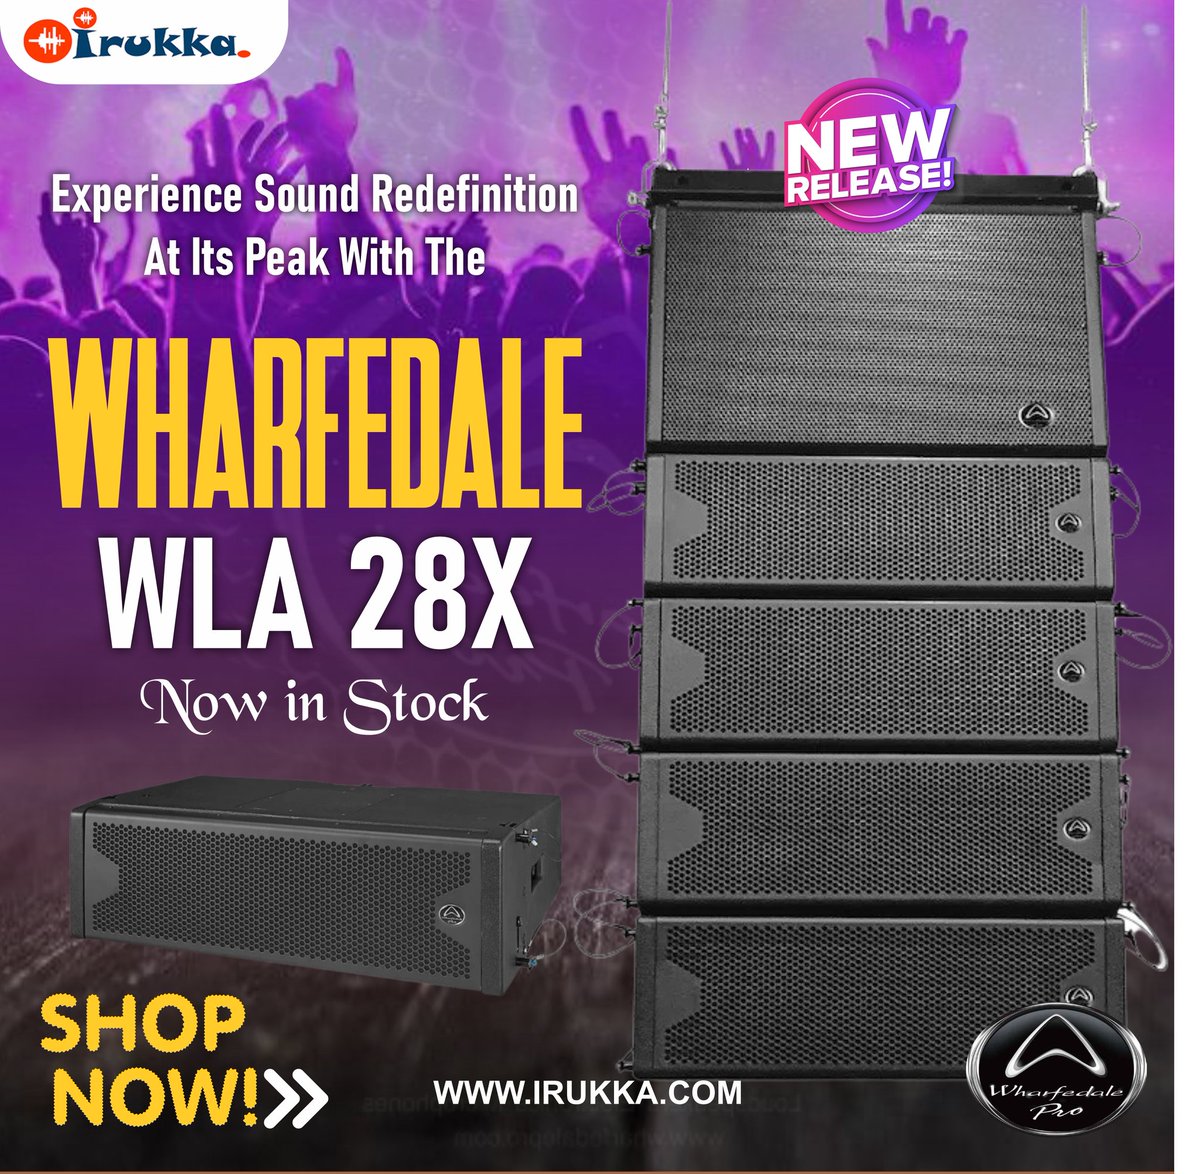 #Wharfedale Line Array Speaker- #WLA28X offers a #sound quality and authority that will make both the audience and the competitors gape. 

For More Information;
Visit our website irukka.com
send a quick dm or send a mail to sales@irukka.com.

#wharfedalelinearray